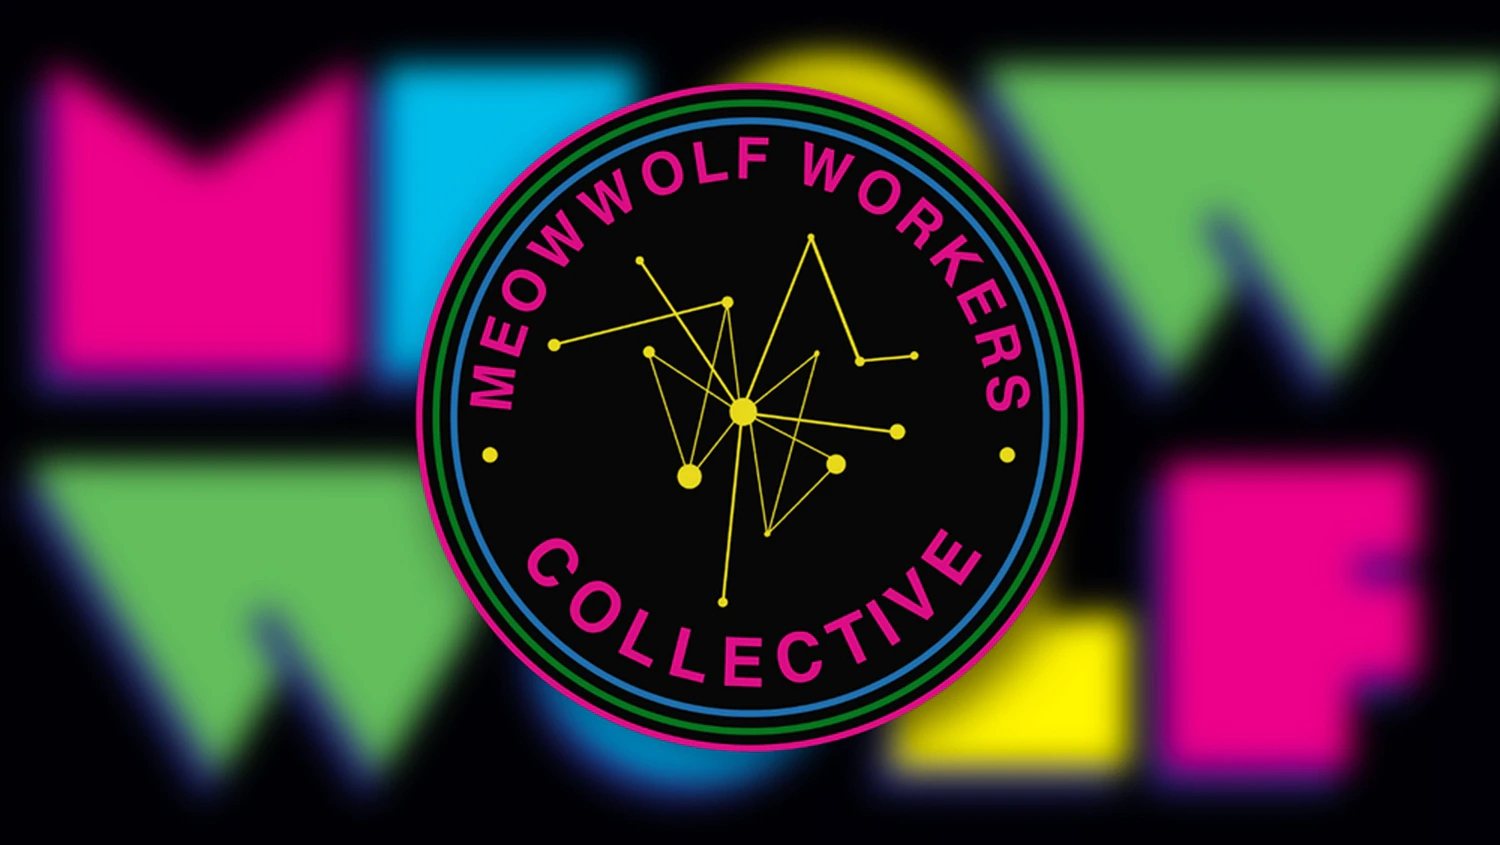 meow wolf santa fe events